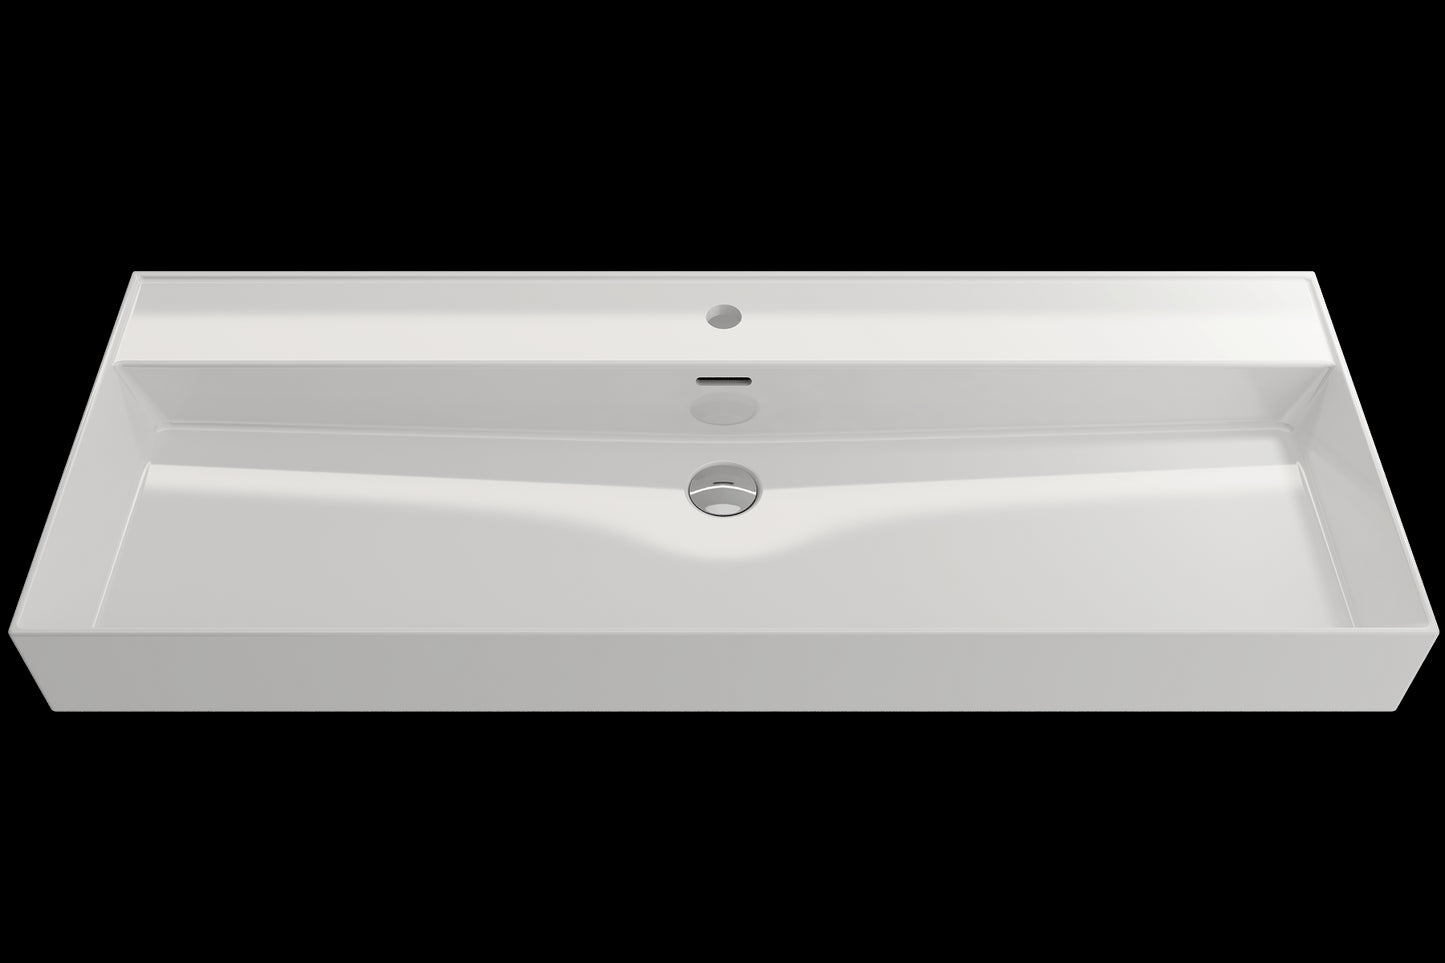 BOCCHI MILANO 47.75" Wall-Mounted Sink Fireclay 1-Hole With Overflow